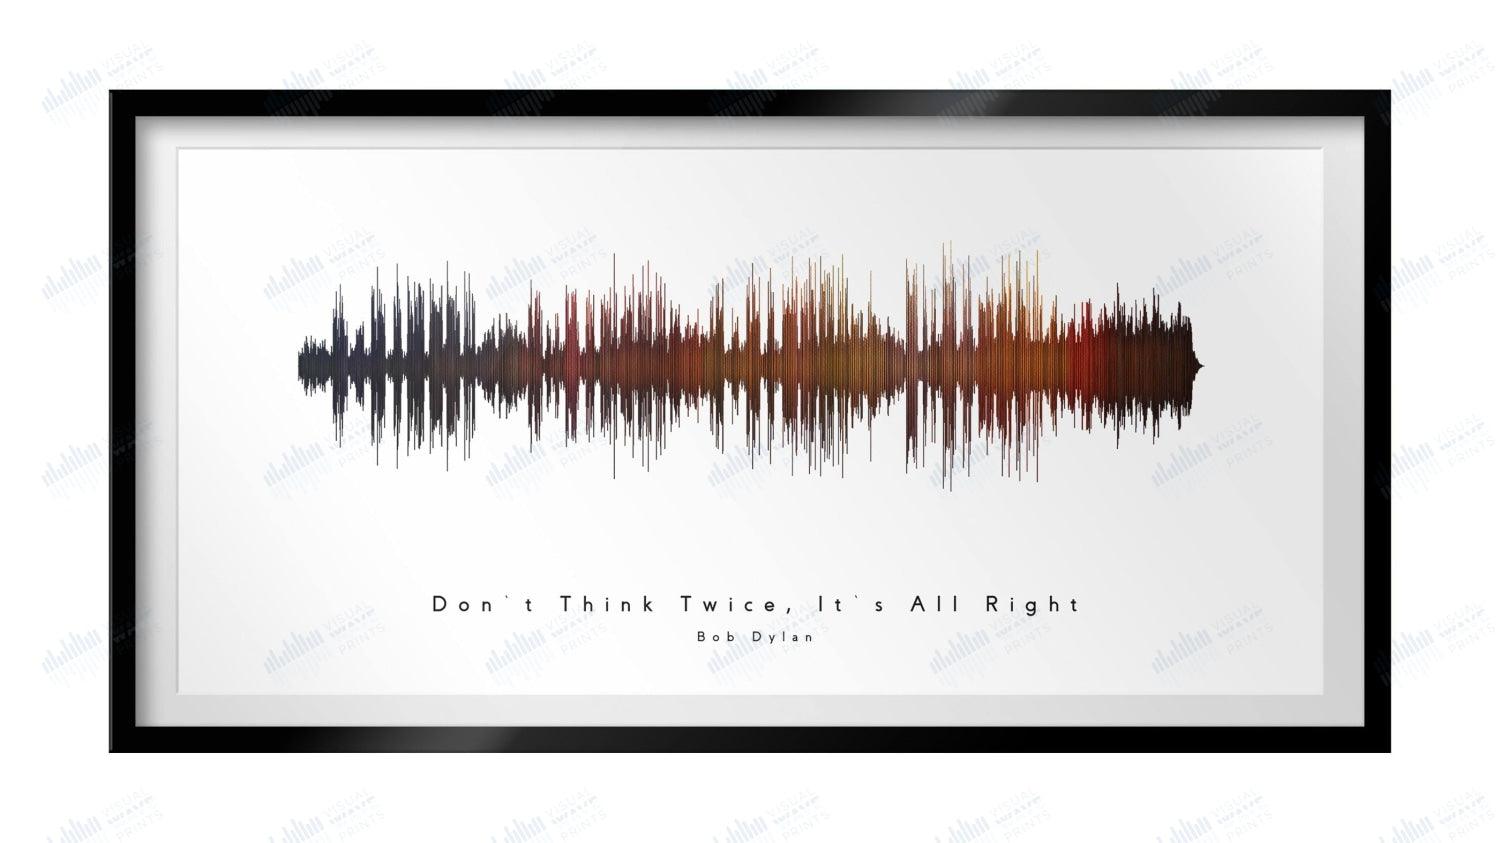 Don't Think Twice, It's All Right by Bob Dylan – Visual Wave Prints